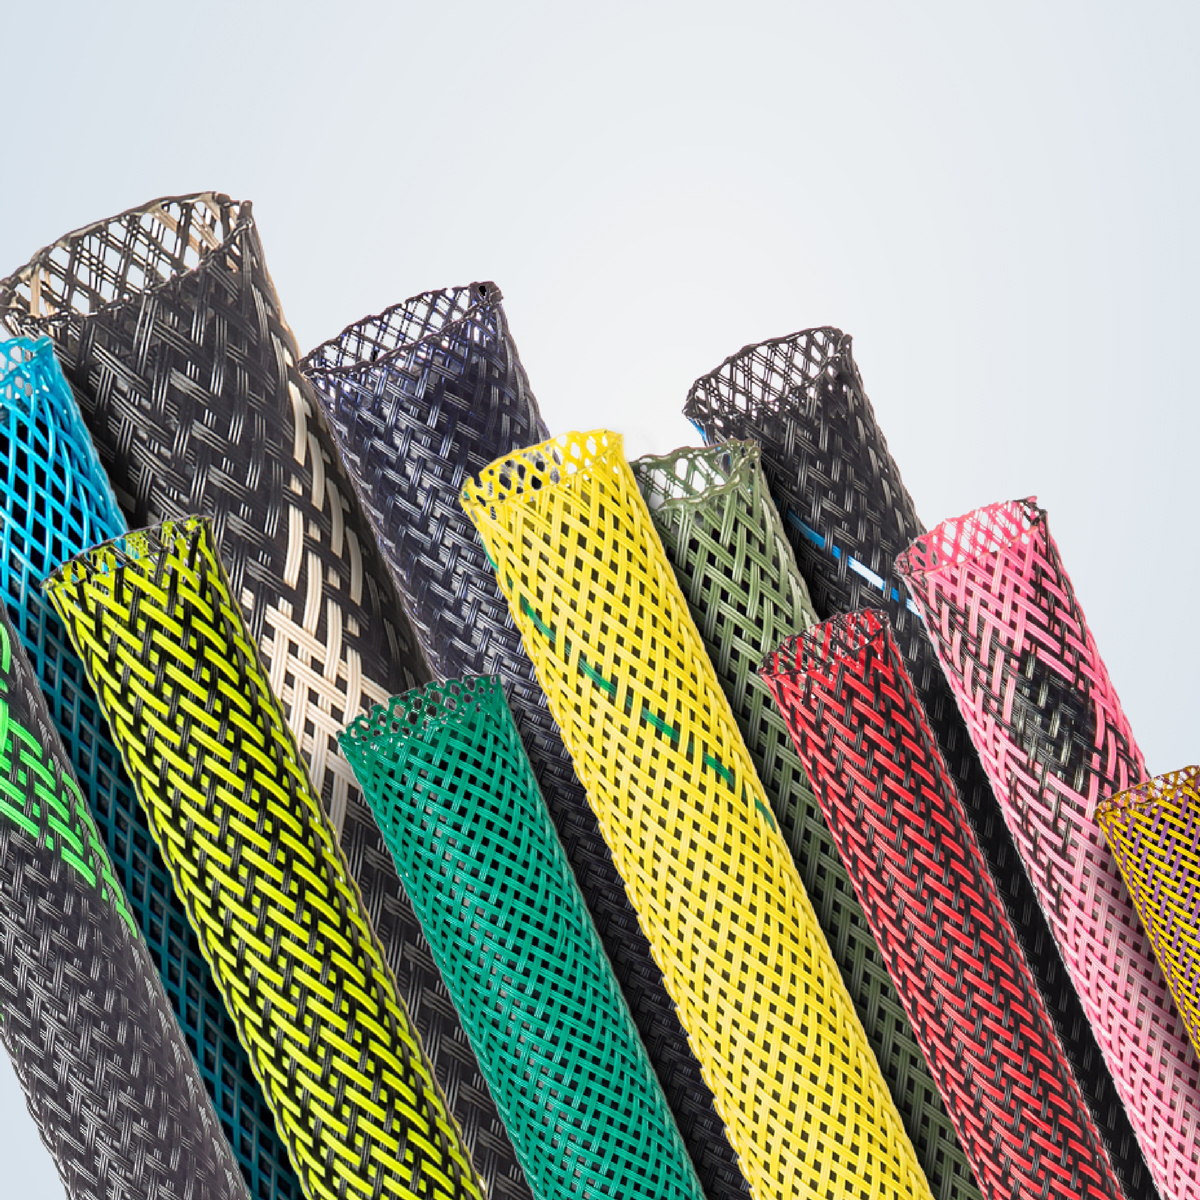 Techflex® Flexo® PET Colored Expandable Braided Cable Sleeving